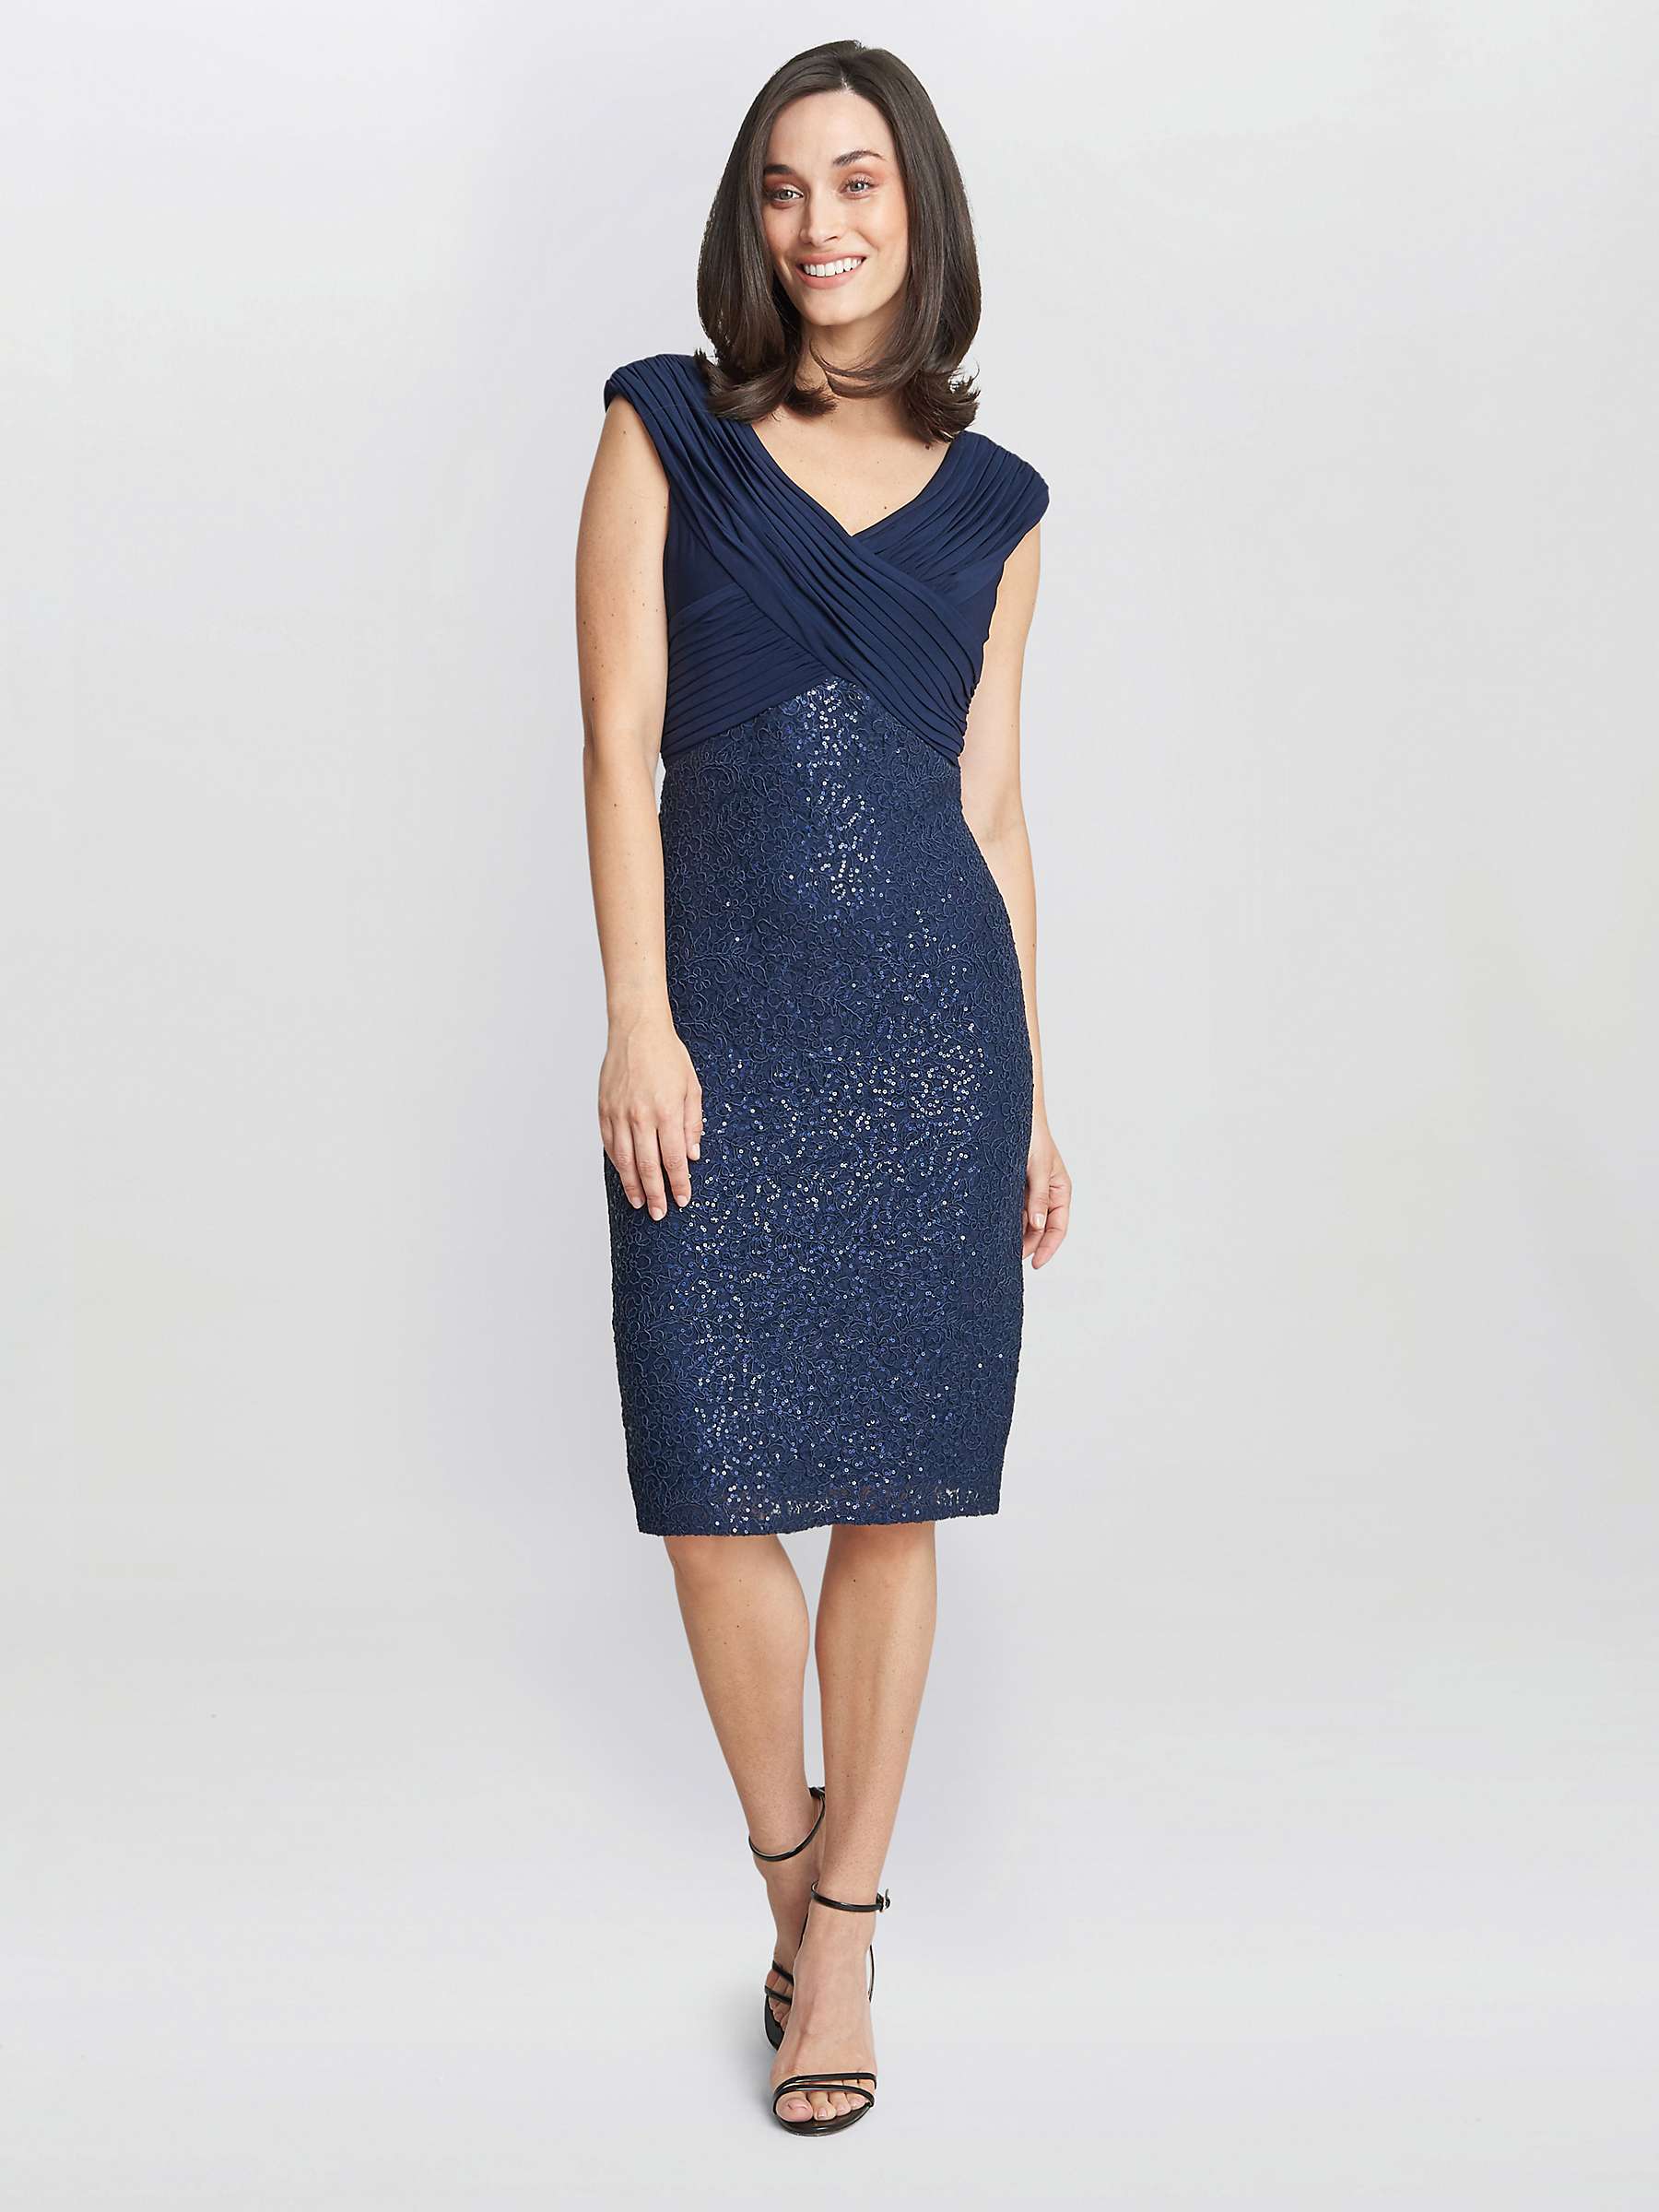 Buy Gina Bacconi Blair Cross Pleated Bodice Dress, Navy Online at johnlewis.com